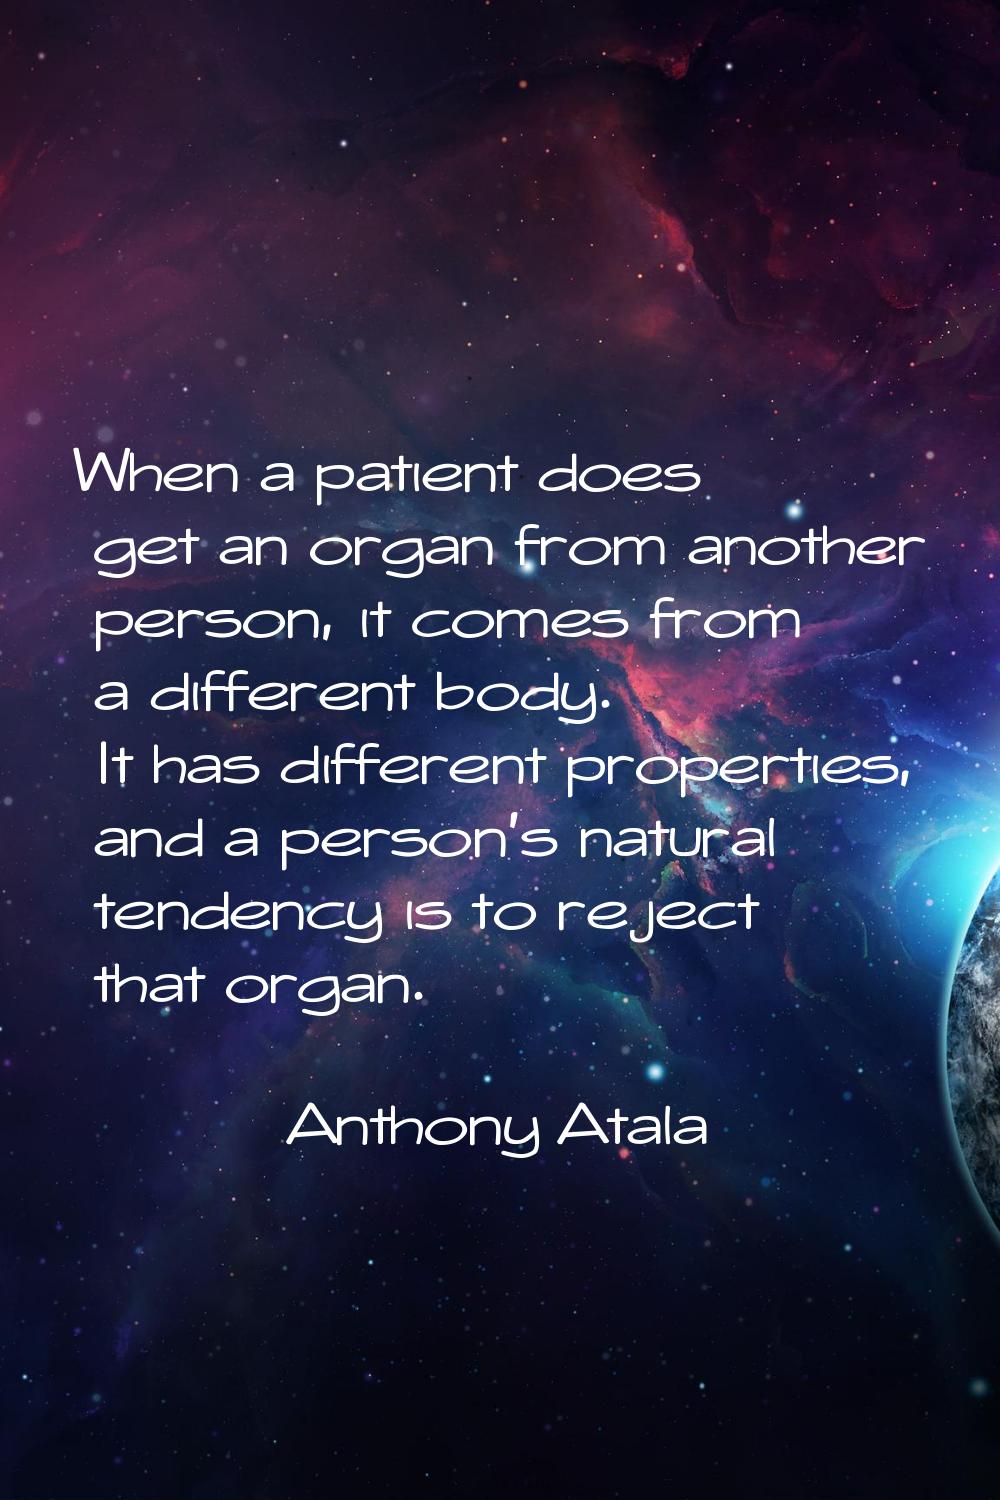 When a patient does get an organ from another person, it comes from a different body. It has differ